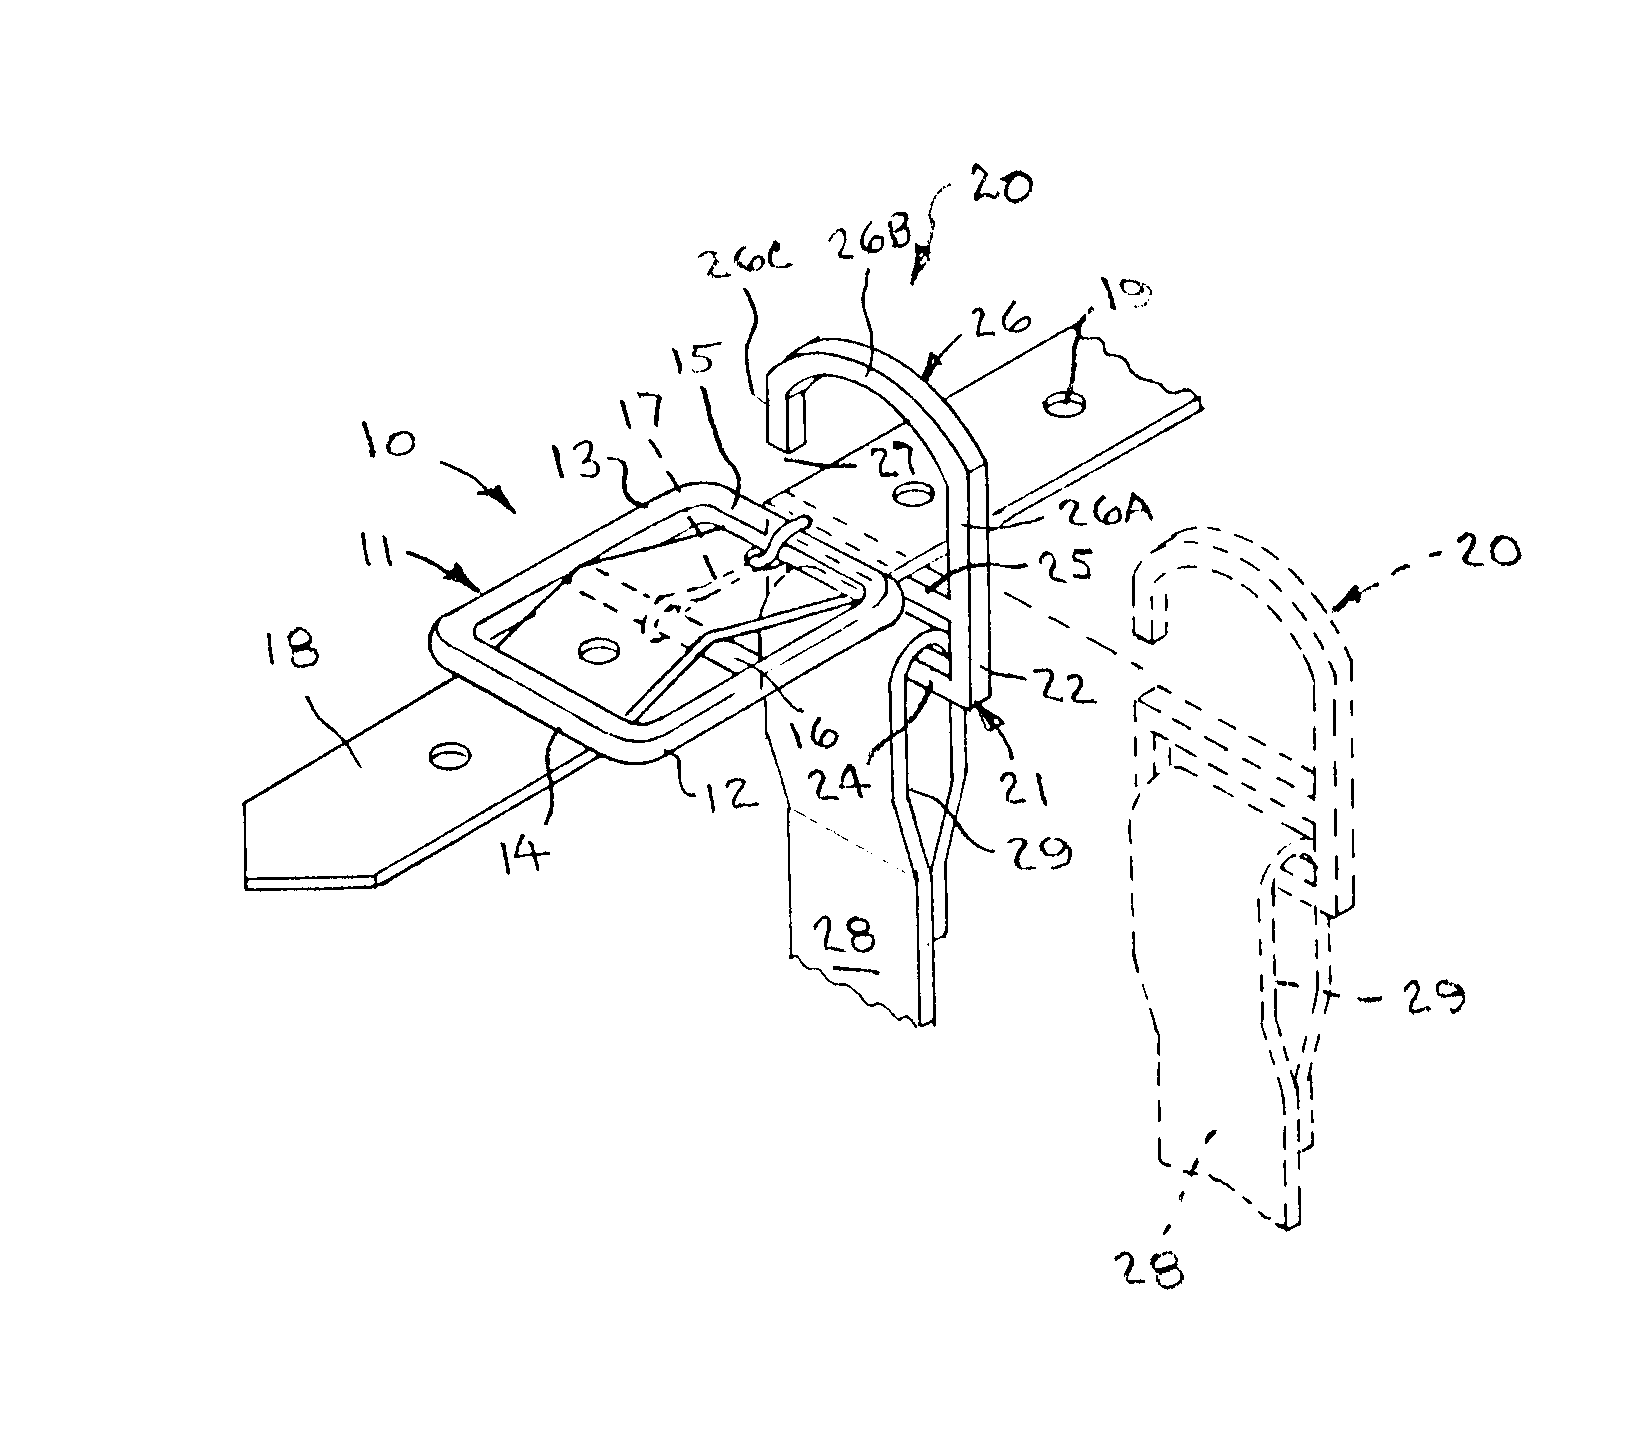 Buckle fastener system and method